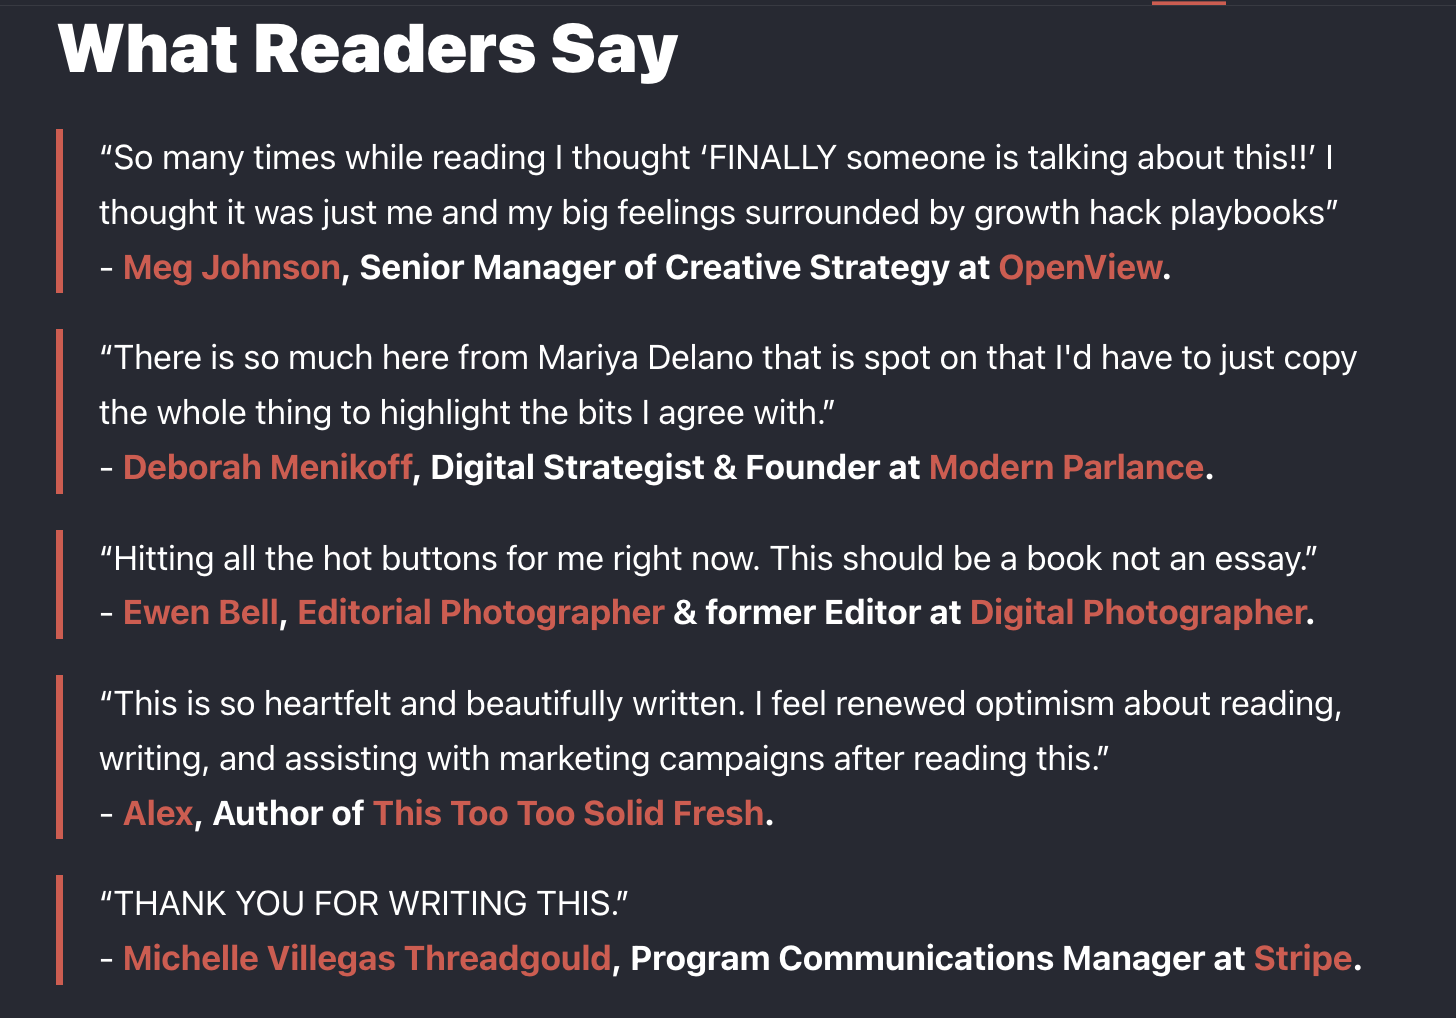 What Readers Say "So many times while reading I thought 'FINALLY someone is talking about this!!' I thought it was just me and my big feelings surrounded by growth hack playbooks" - Meg Johnson, Senior Manager of Creative Strategy at OpenView. "There is so much here from Mariya Delano that is spot on that I'd have to just copy the whole thing to highlight the bits I agree with." - Deborah Menikoff, Digital Strategist & Founder at Modern Parlance. "Hitting all the hot buttons for me right now. This should be a book not an essay." - Ewen Bell, Editorial Photographer & former Editor at Digital Photographer. "This is so heartfelt and beautifully written. I feel renewed optimism about reading, writing, and assisting with marketing campaigns after reading this." - Alex, Author of This Too Too Solid Fresh. "THANK YOU FOR WRITING THIS." - Michelle Villegas Threadgould, Program Communications Manager at Stripe.